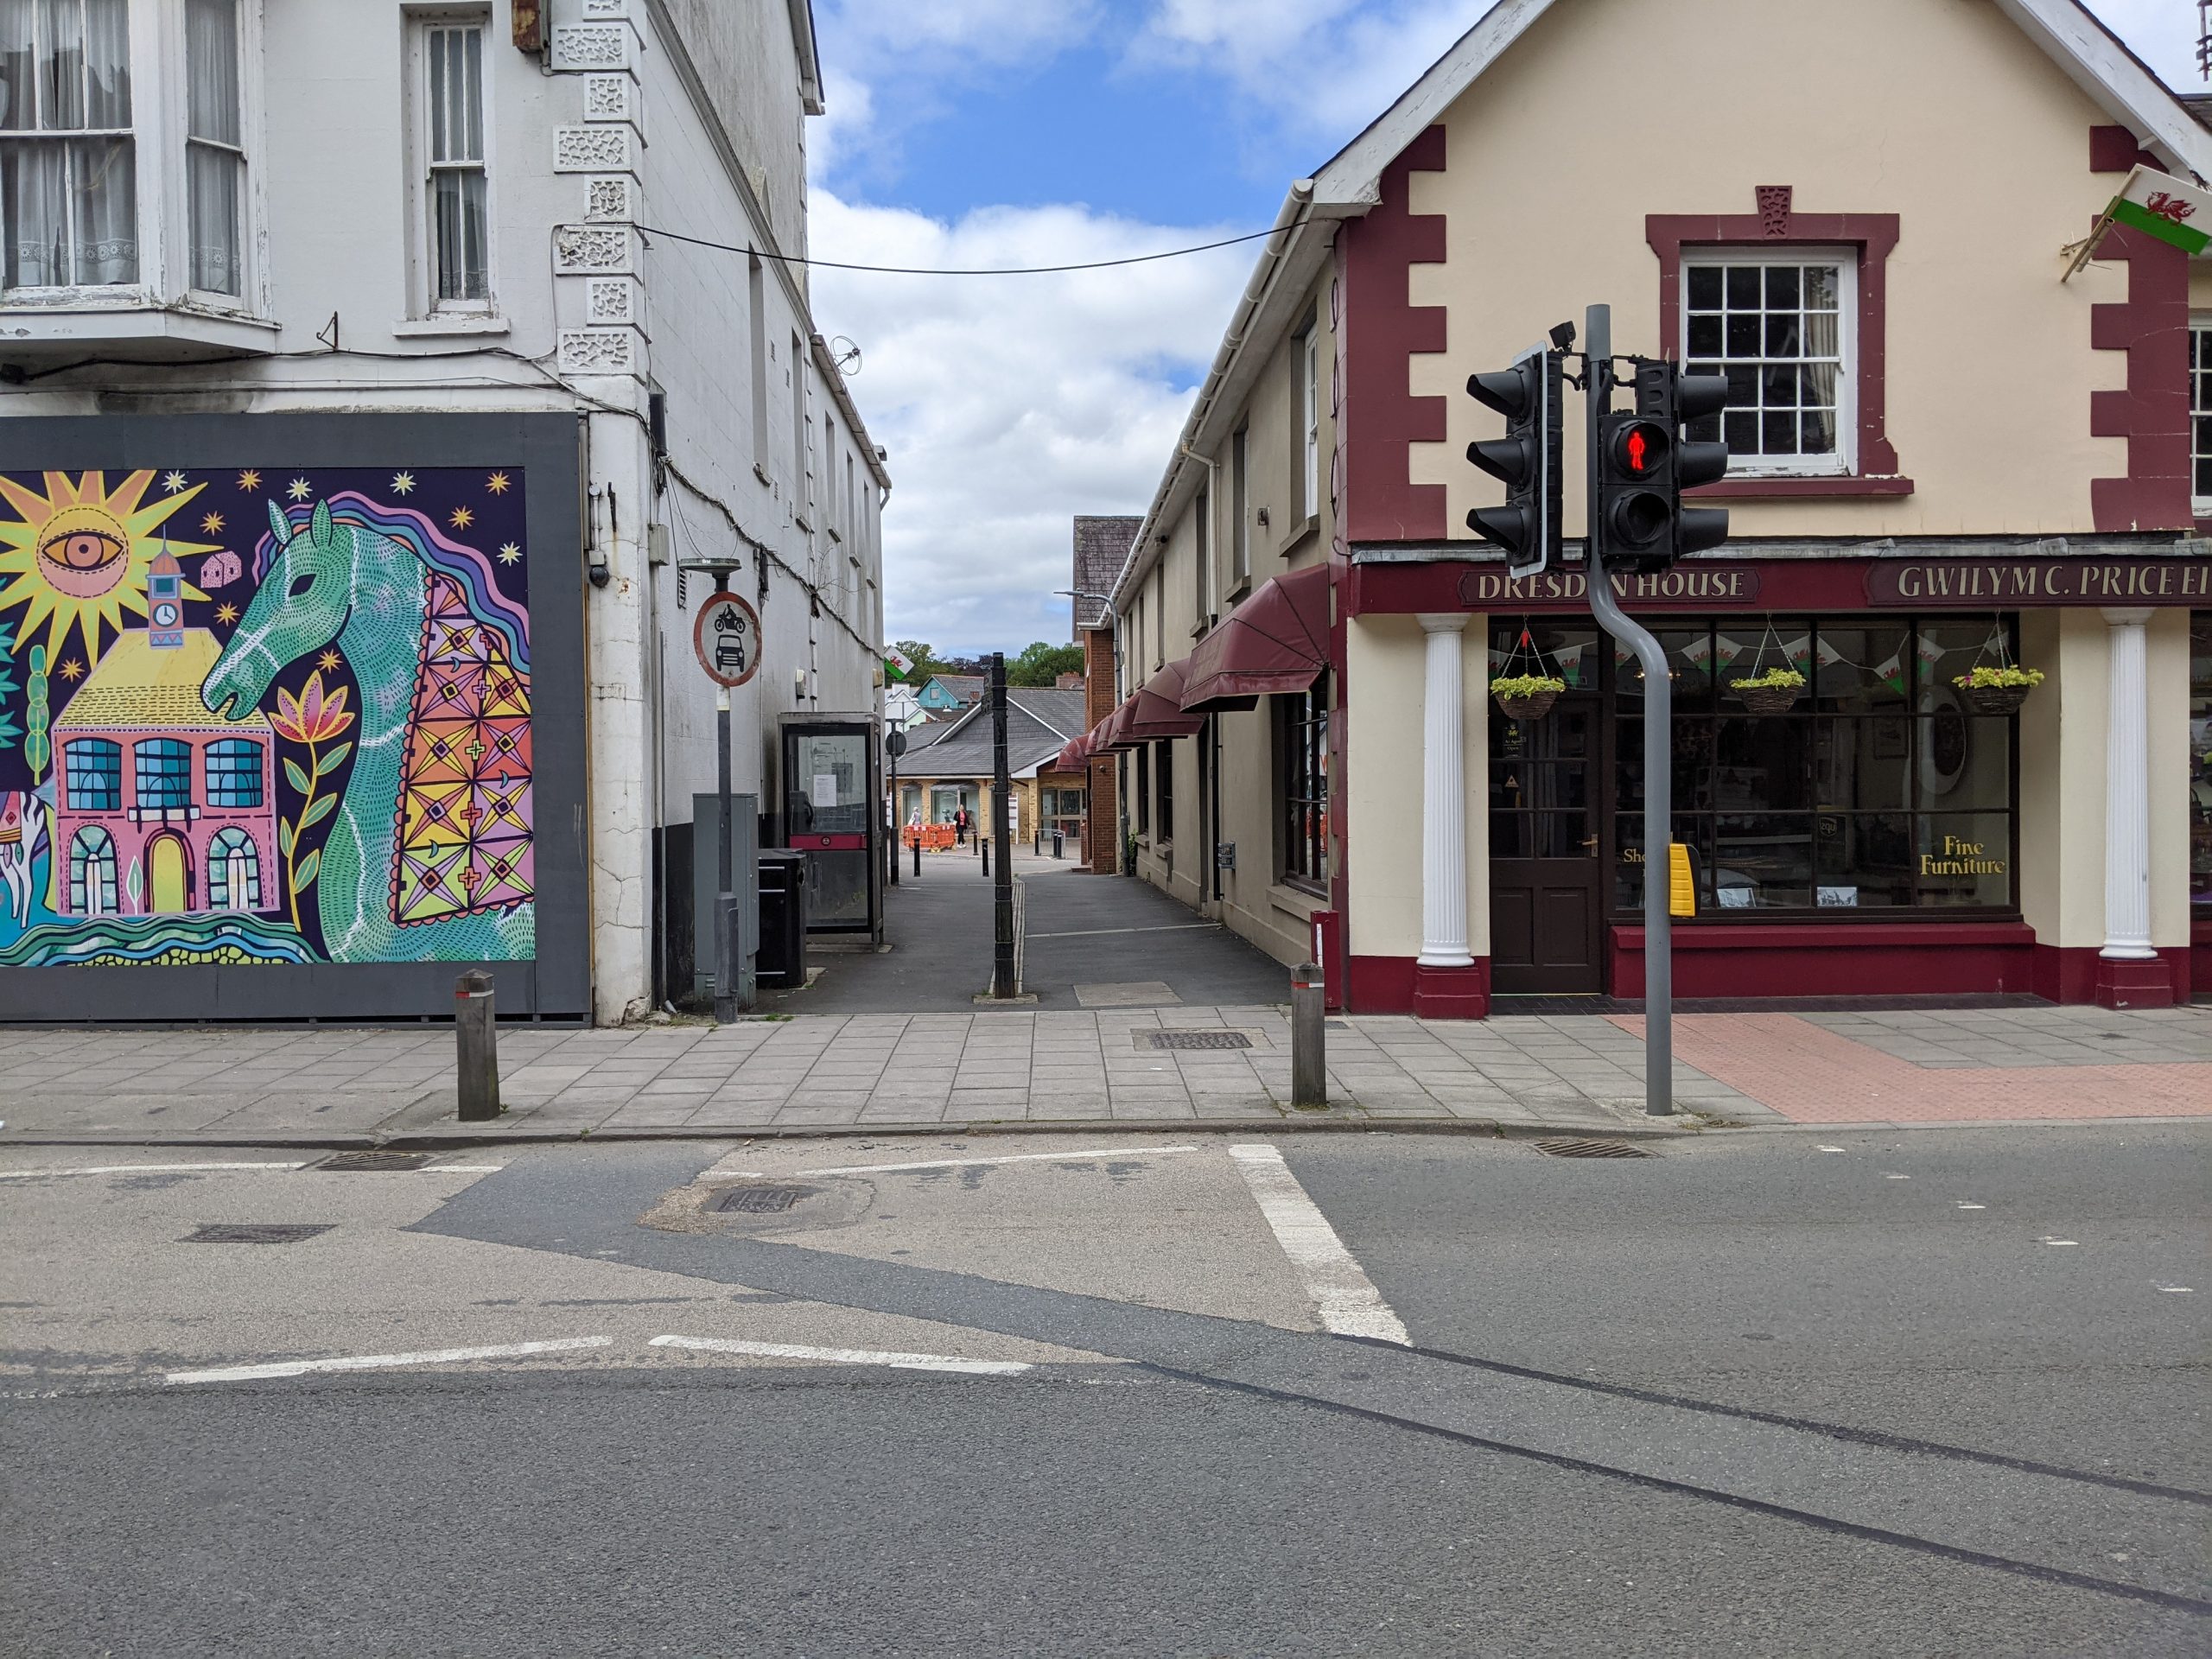 Looking across street to narrower street with colourful historic houses and mural